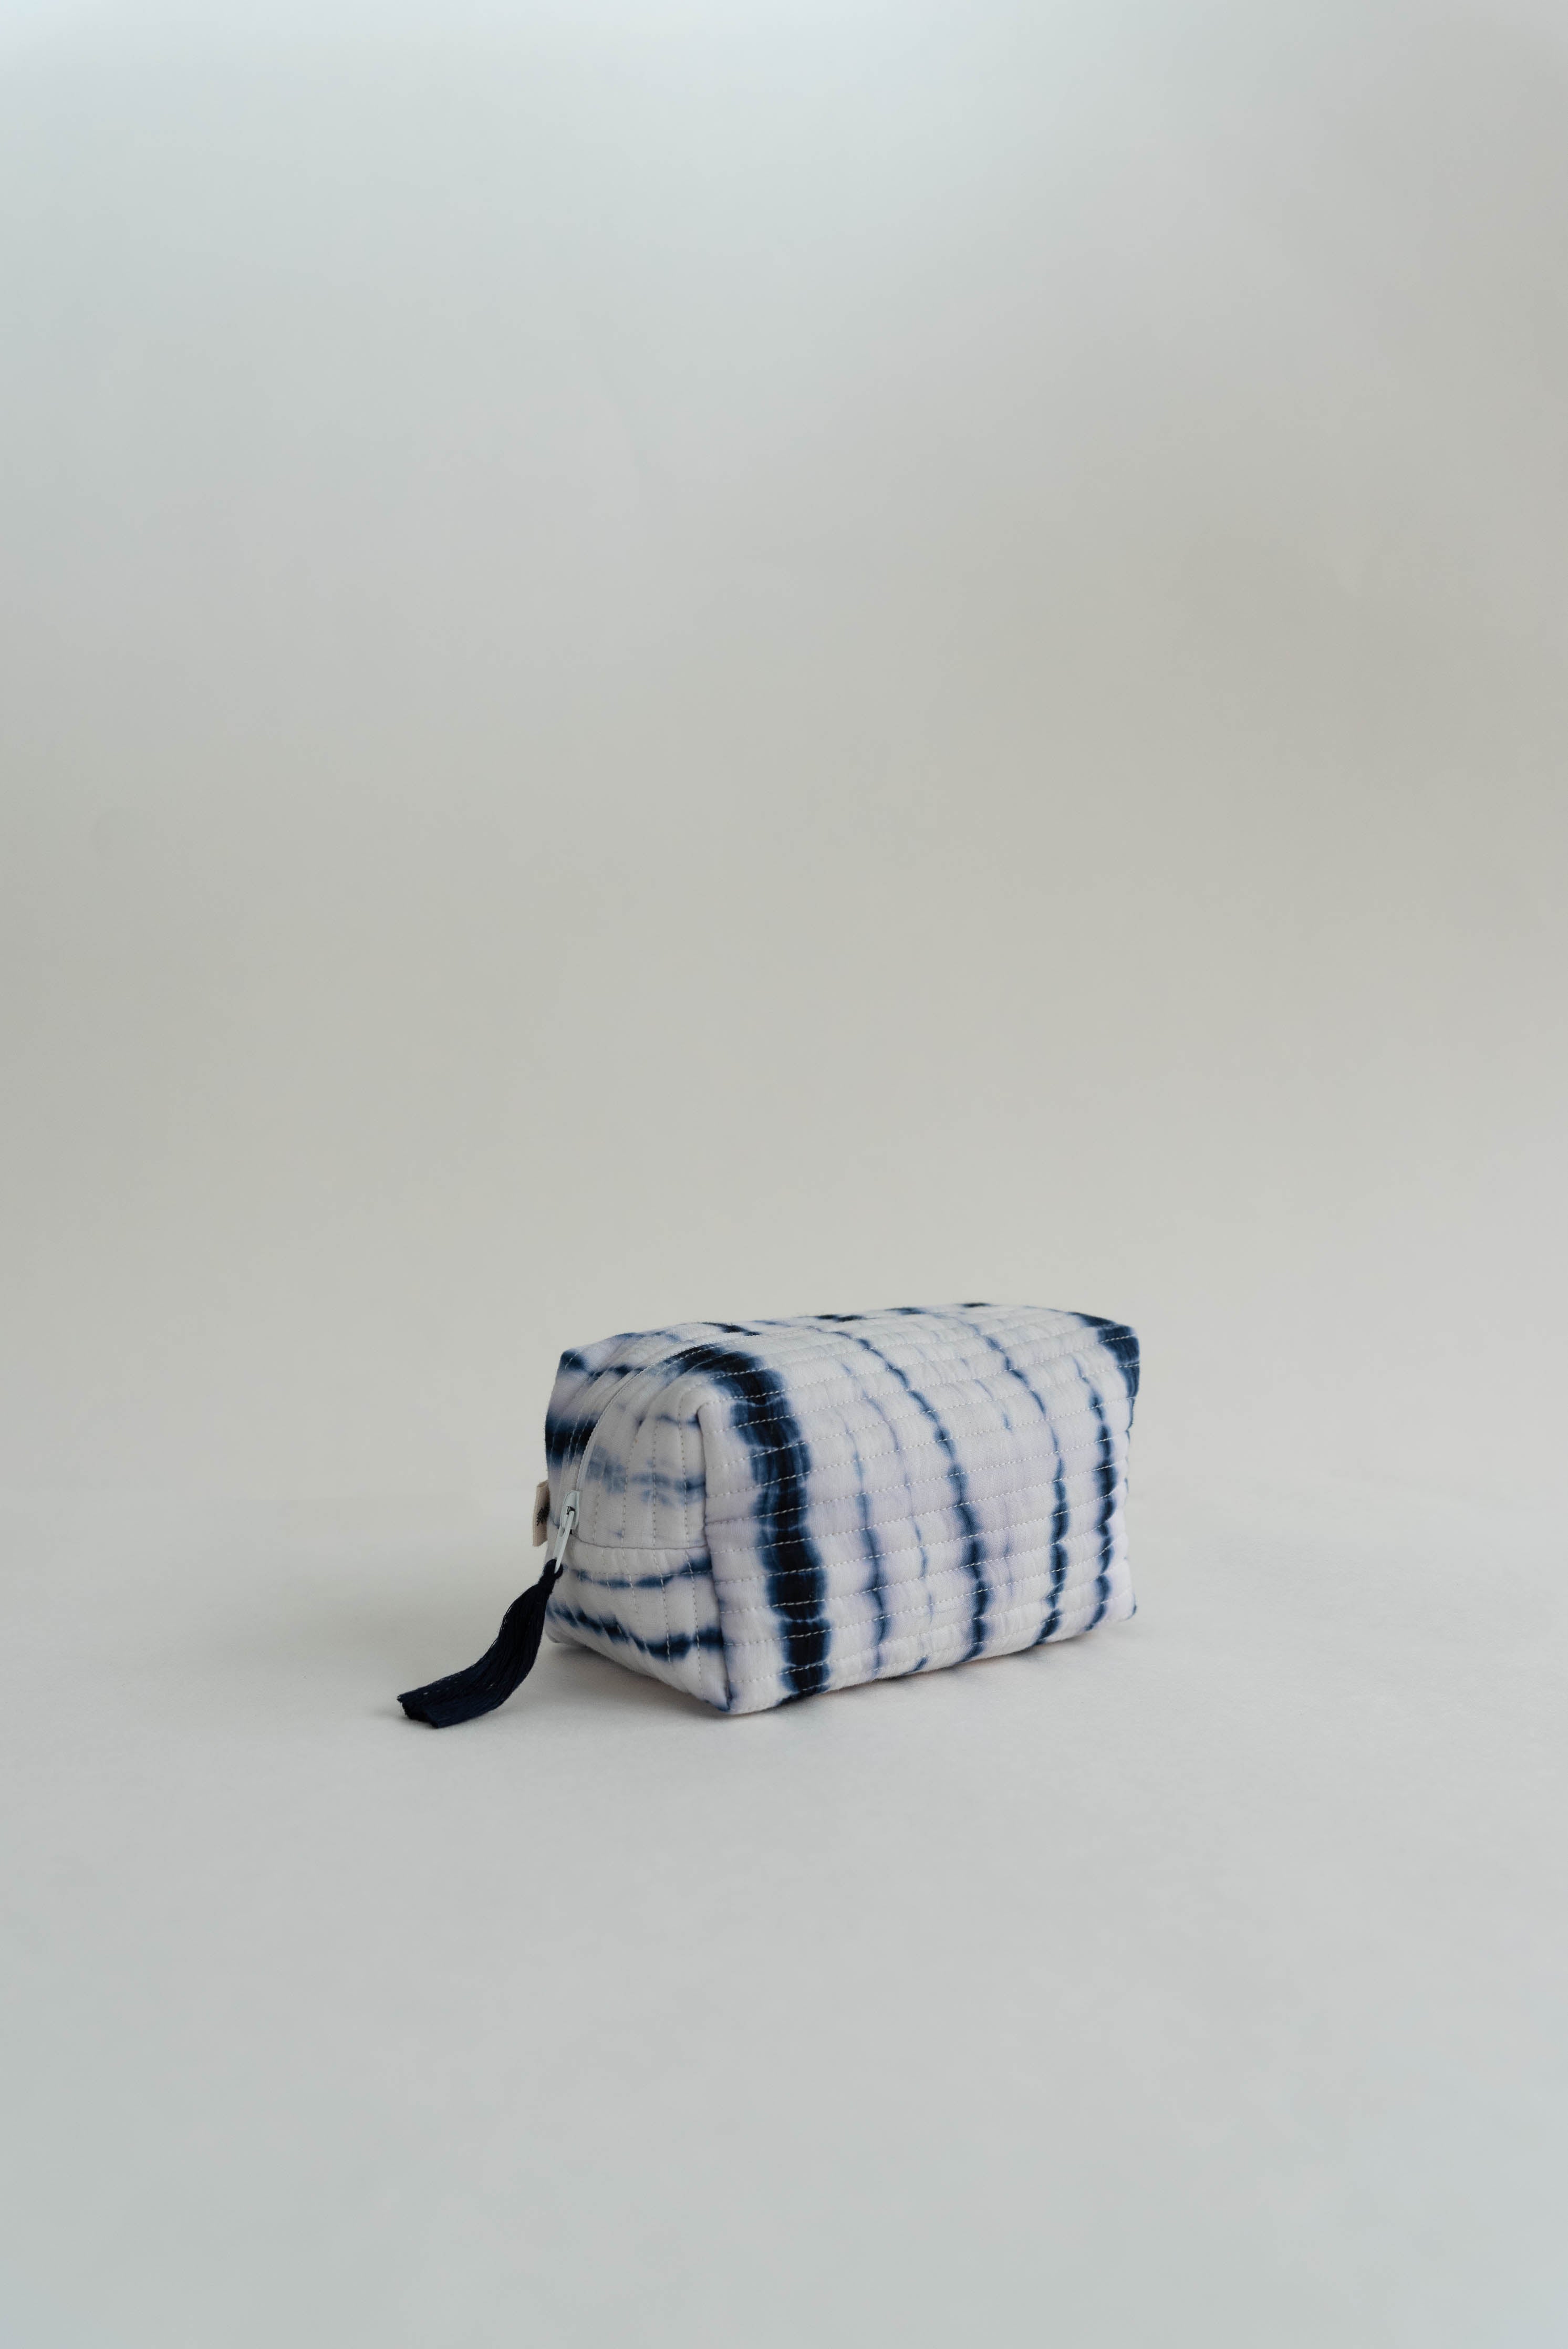 Shibori Quilted Pouch - Green